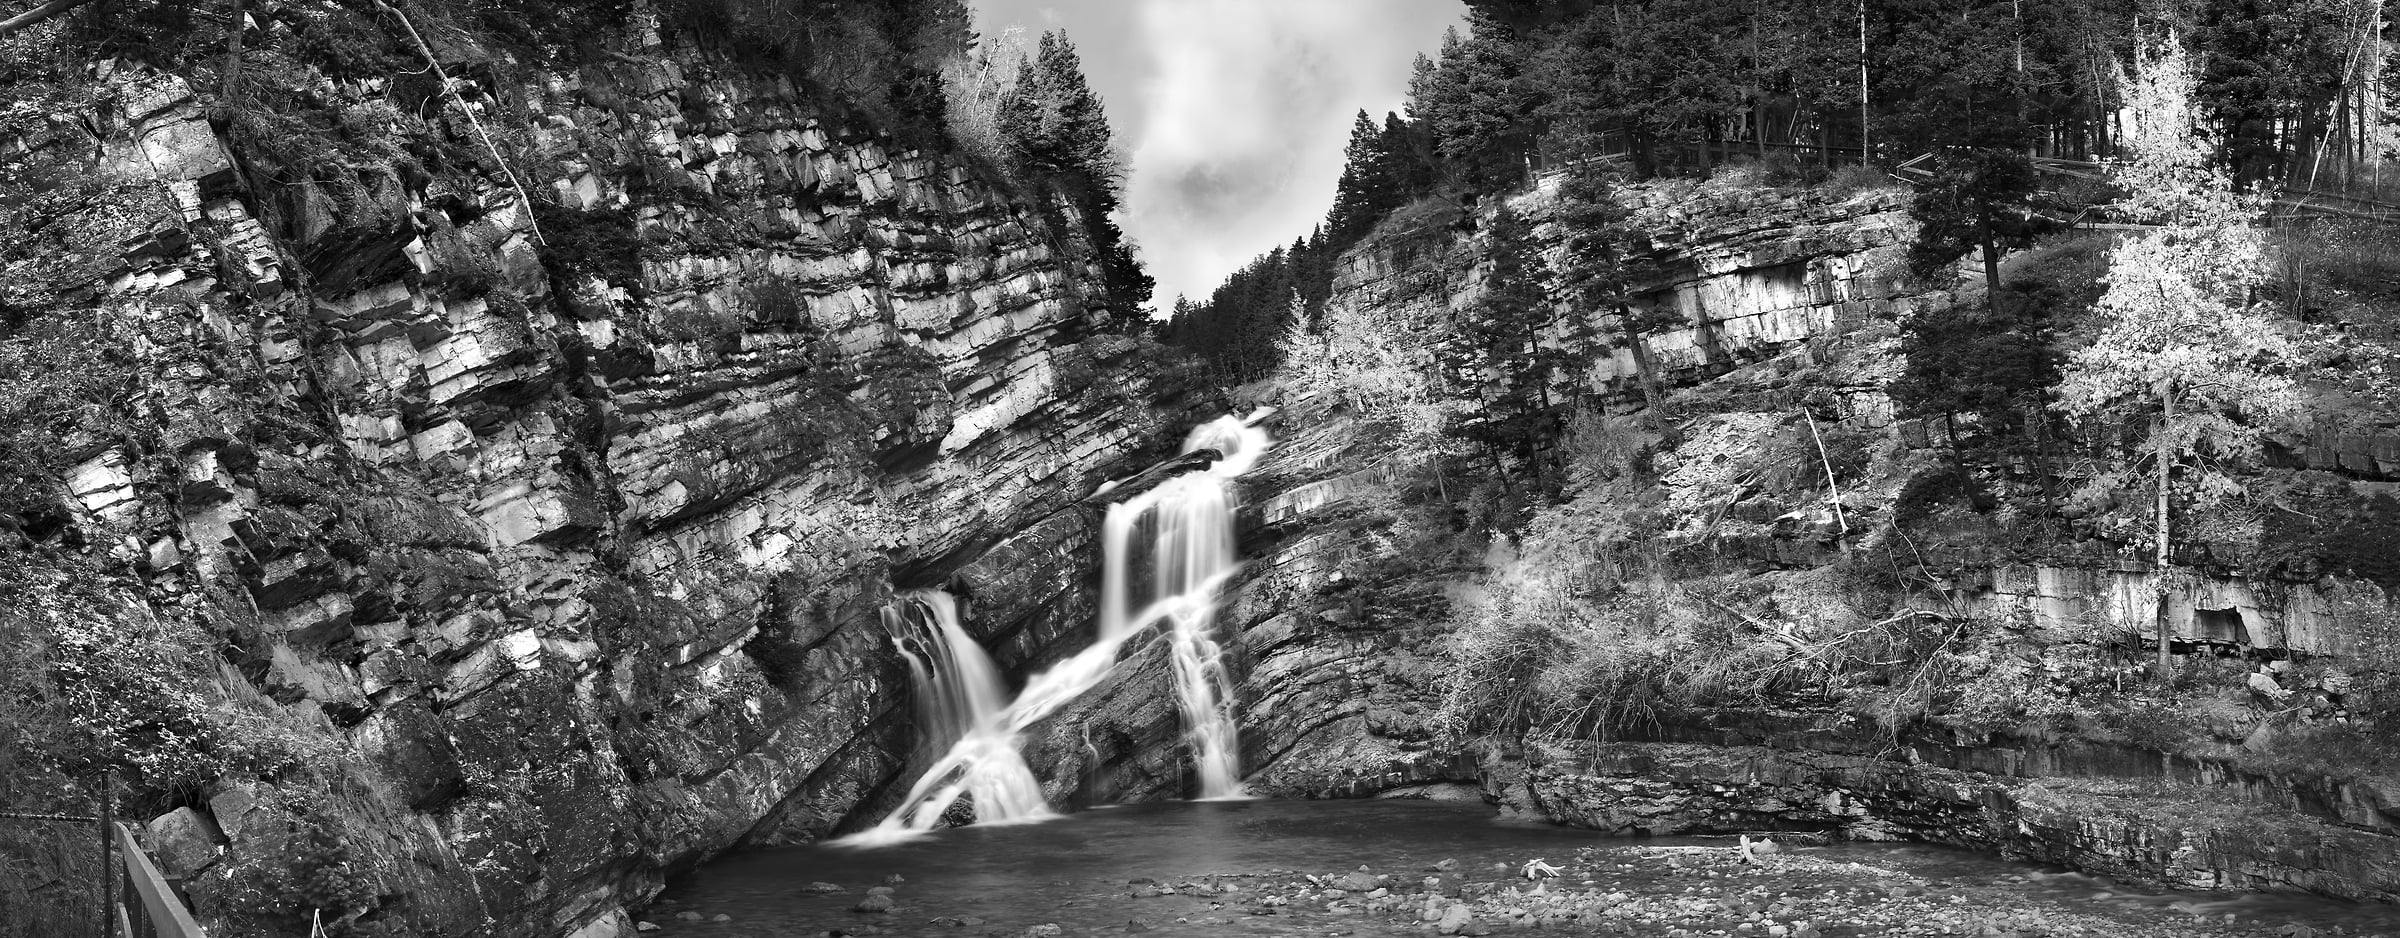 1,408 megapixels! A very high resolution, large-format VAST photo print of Cameron Falls waterfall in Waterton Lakes National Park; fine art nature photograph created by Steven Webster in Alberta, Canada